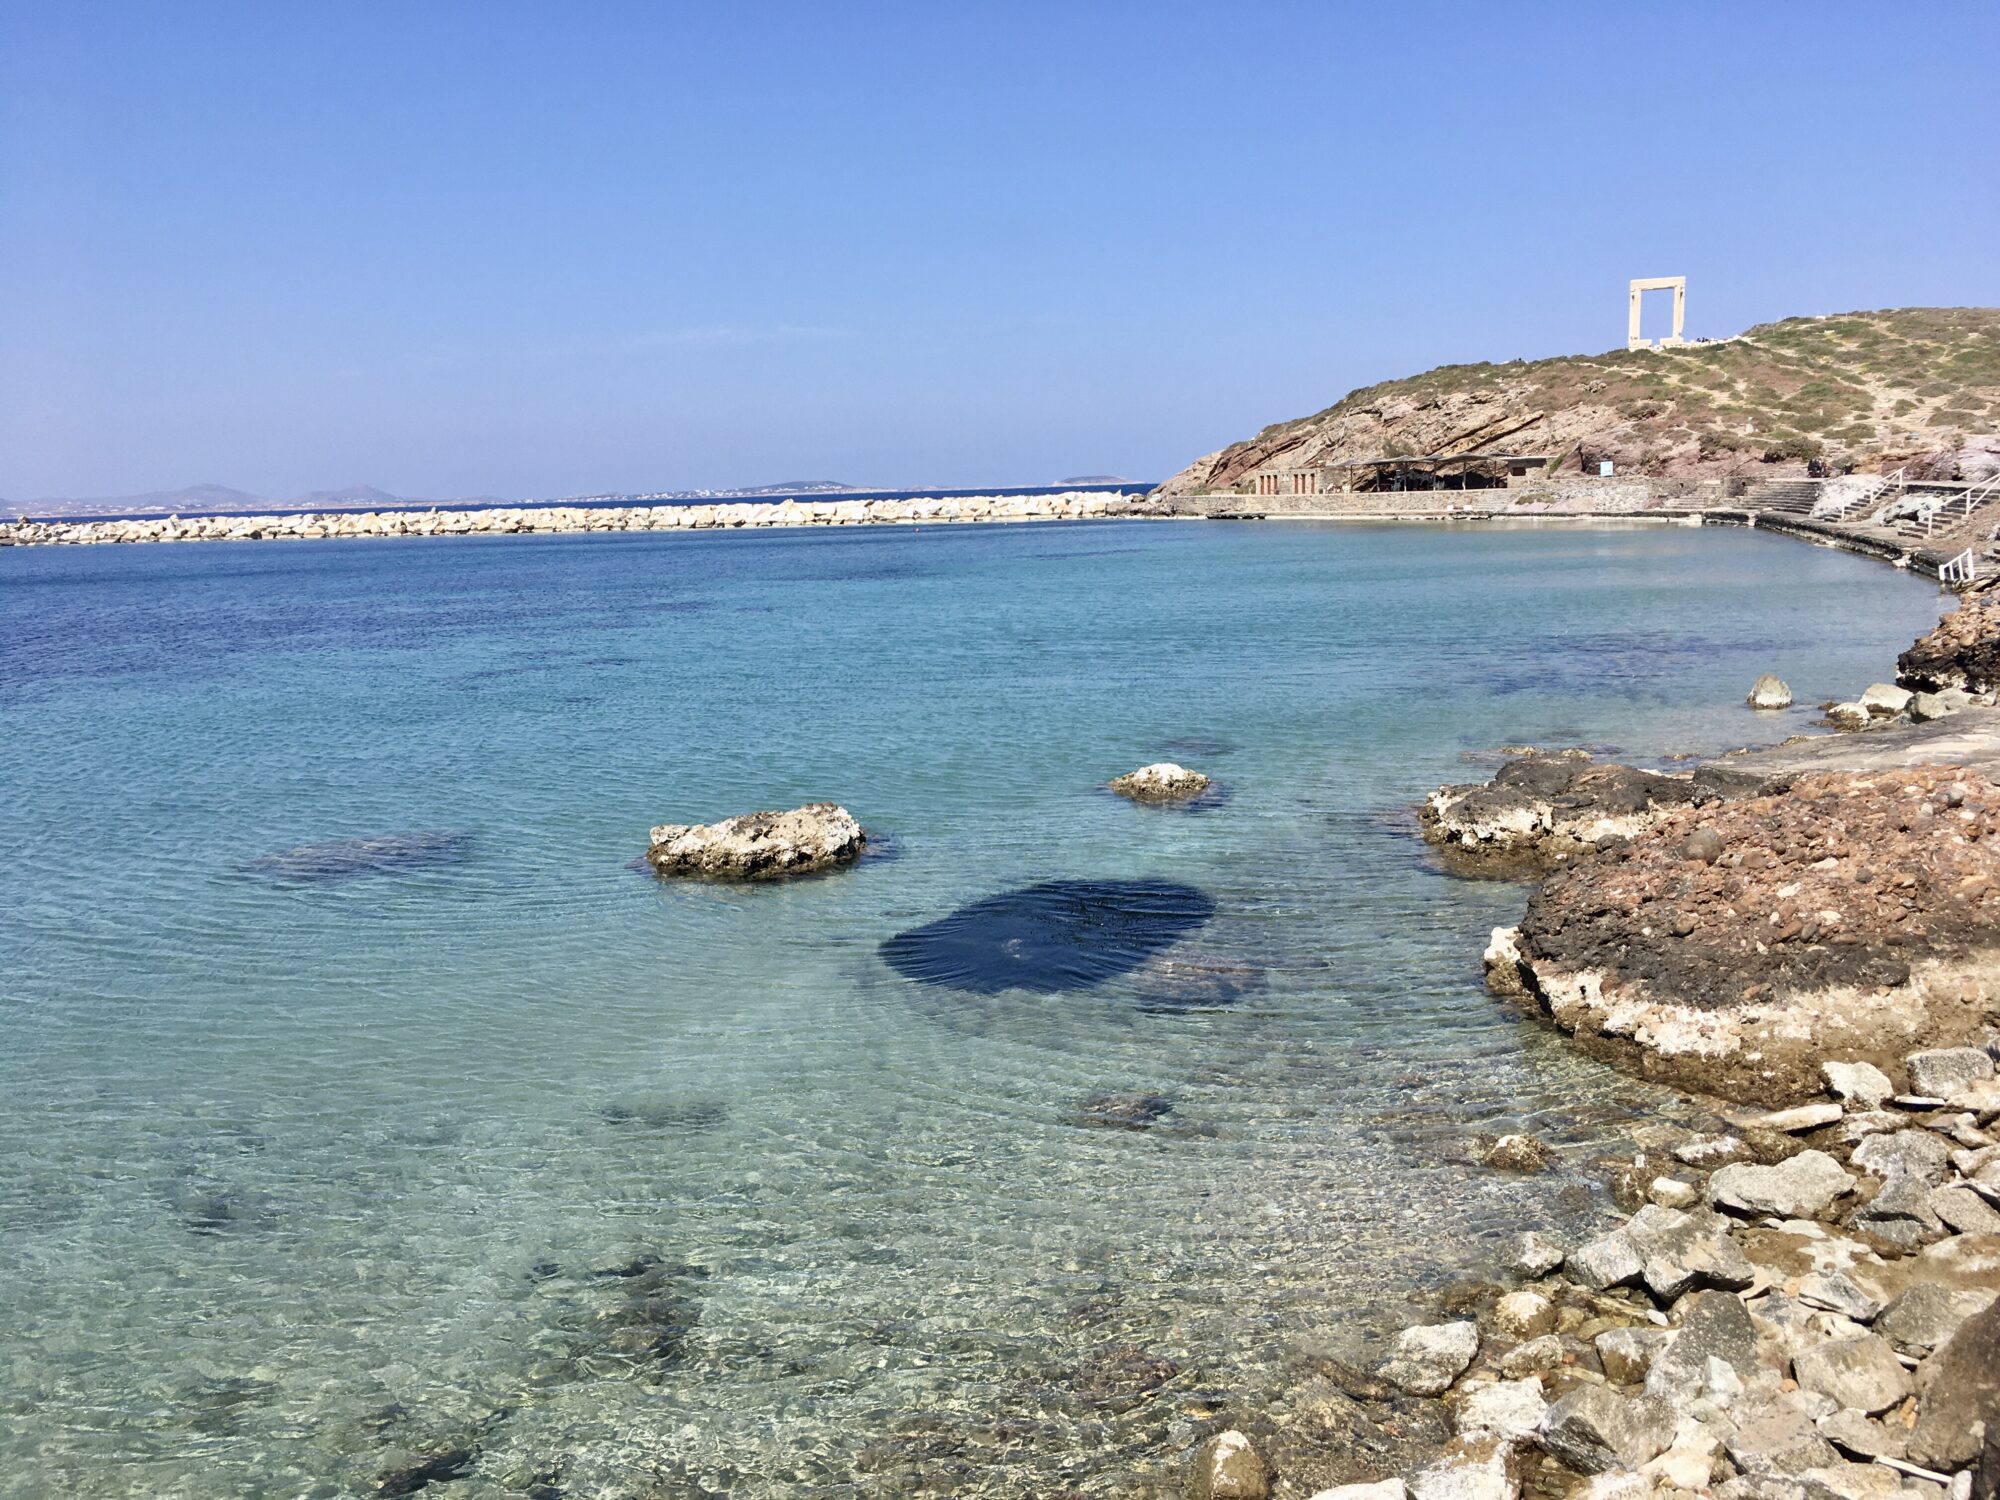 New collaboration with the largest island of the Cyclades